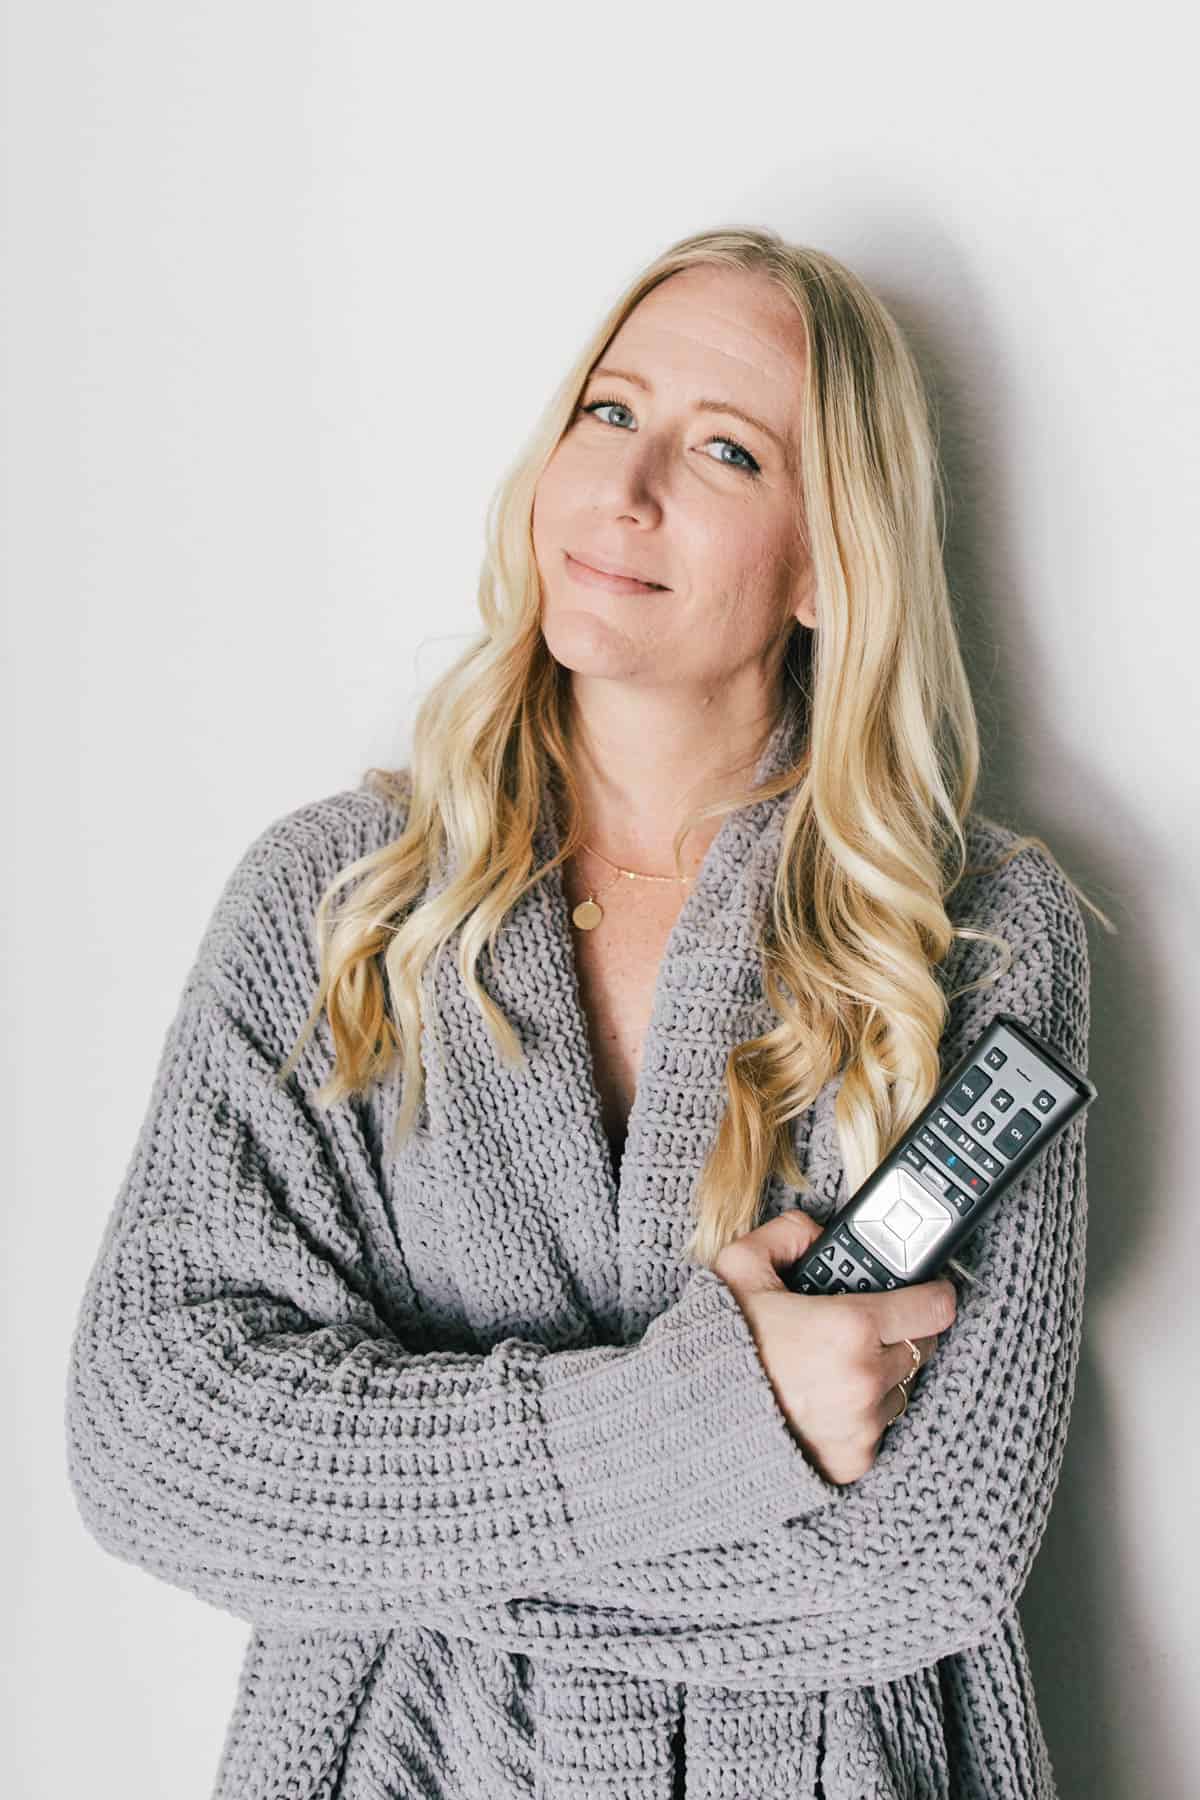 A mom in a cozy sweater holding a remote.